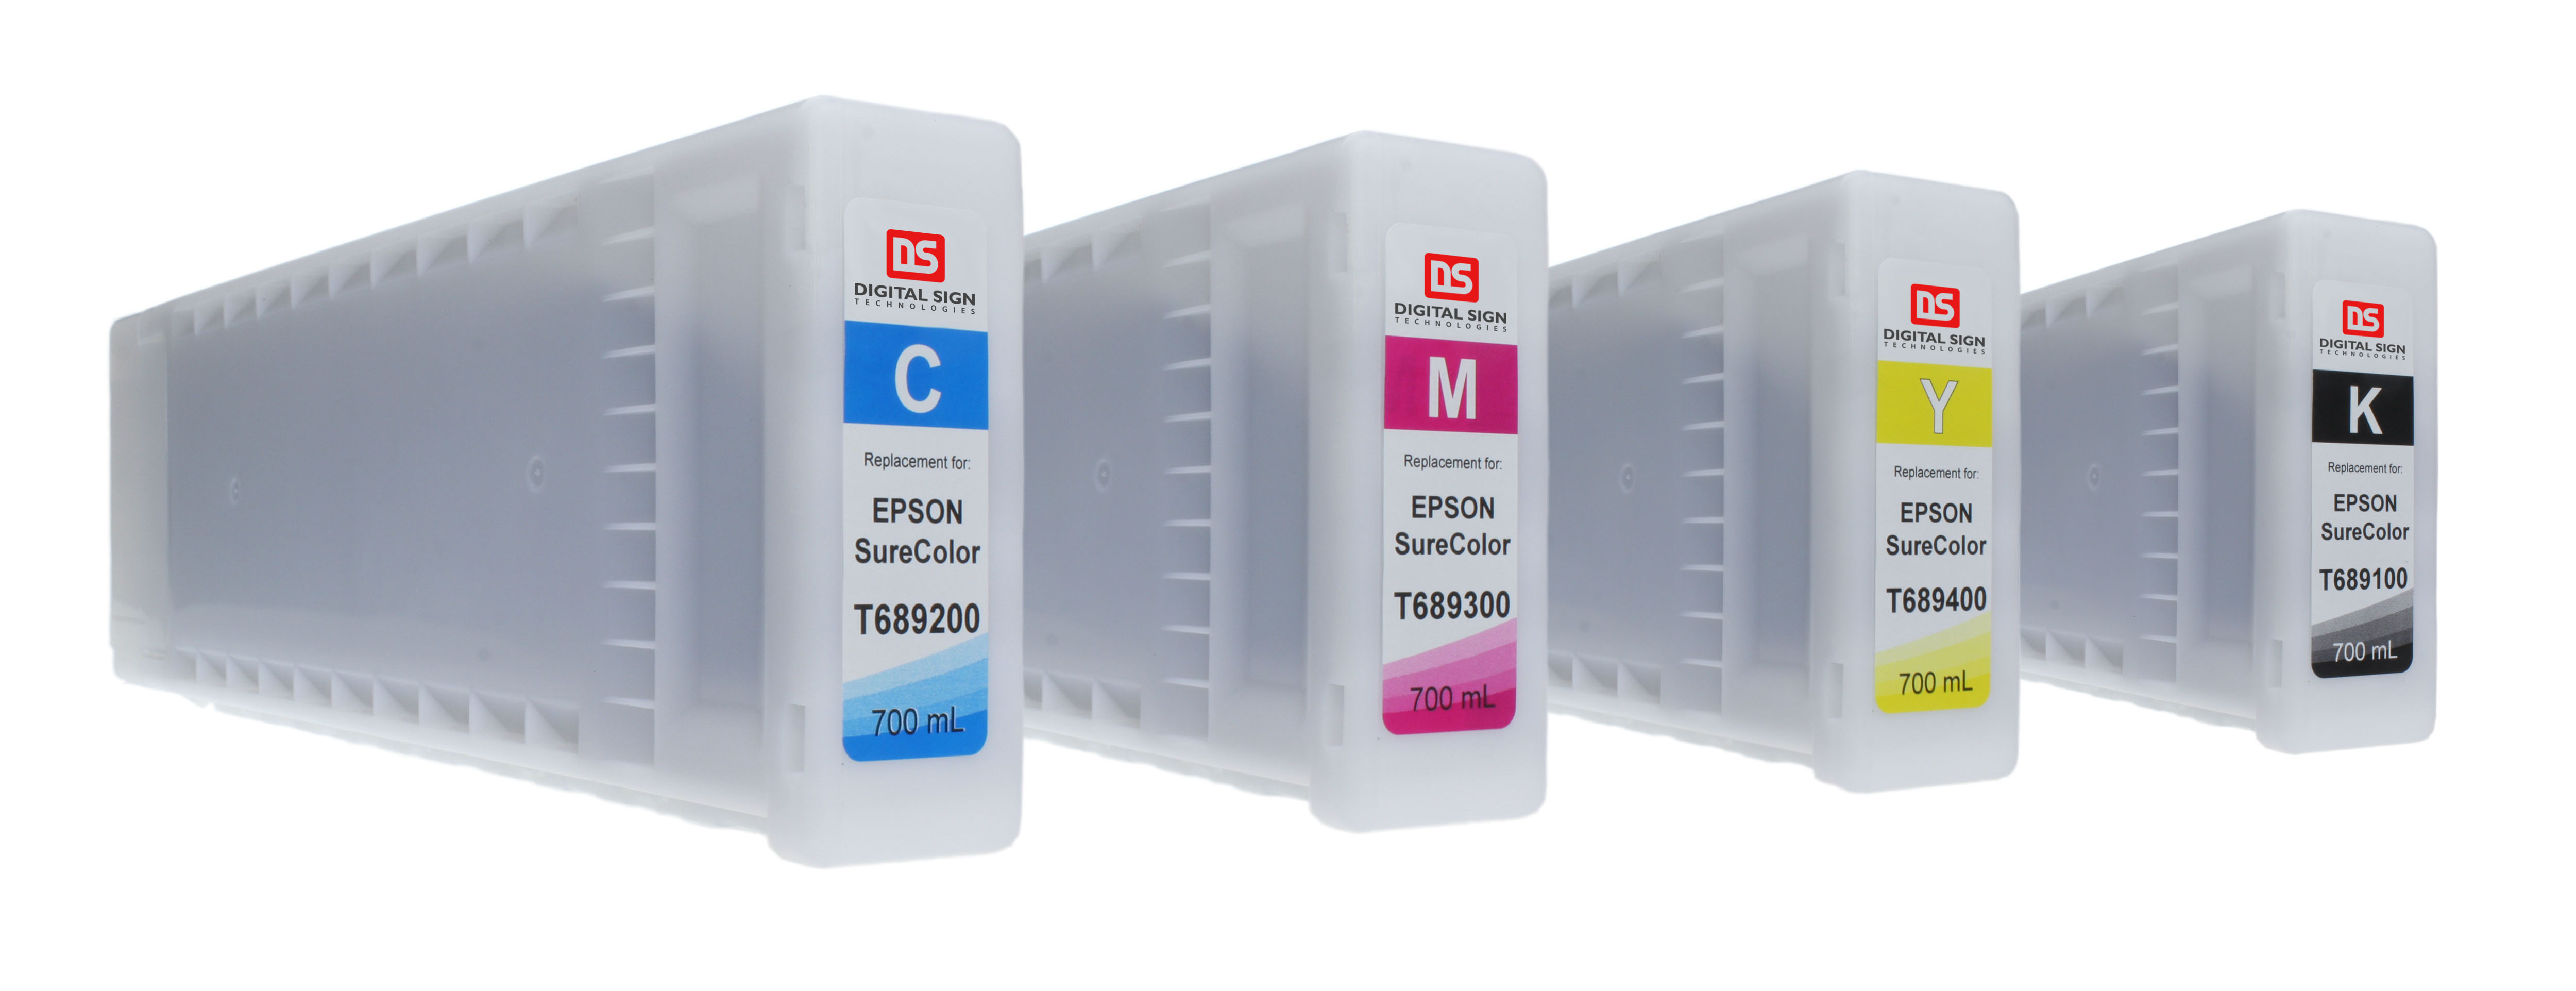 Epson UltraChrome GS2 Ink Cartridges by DST